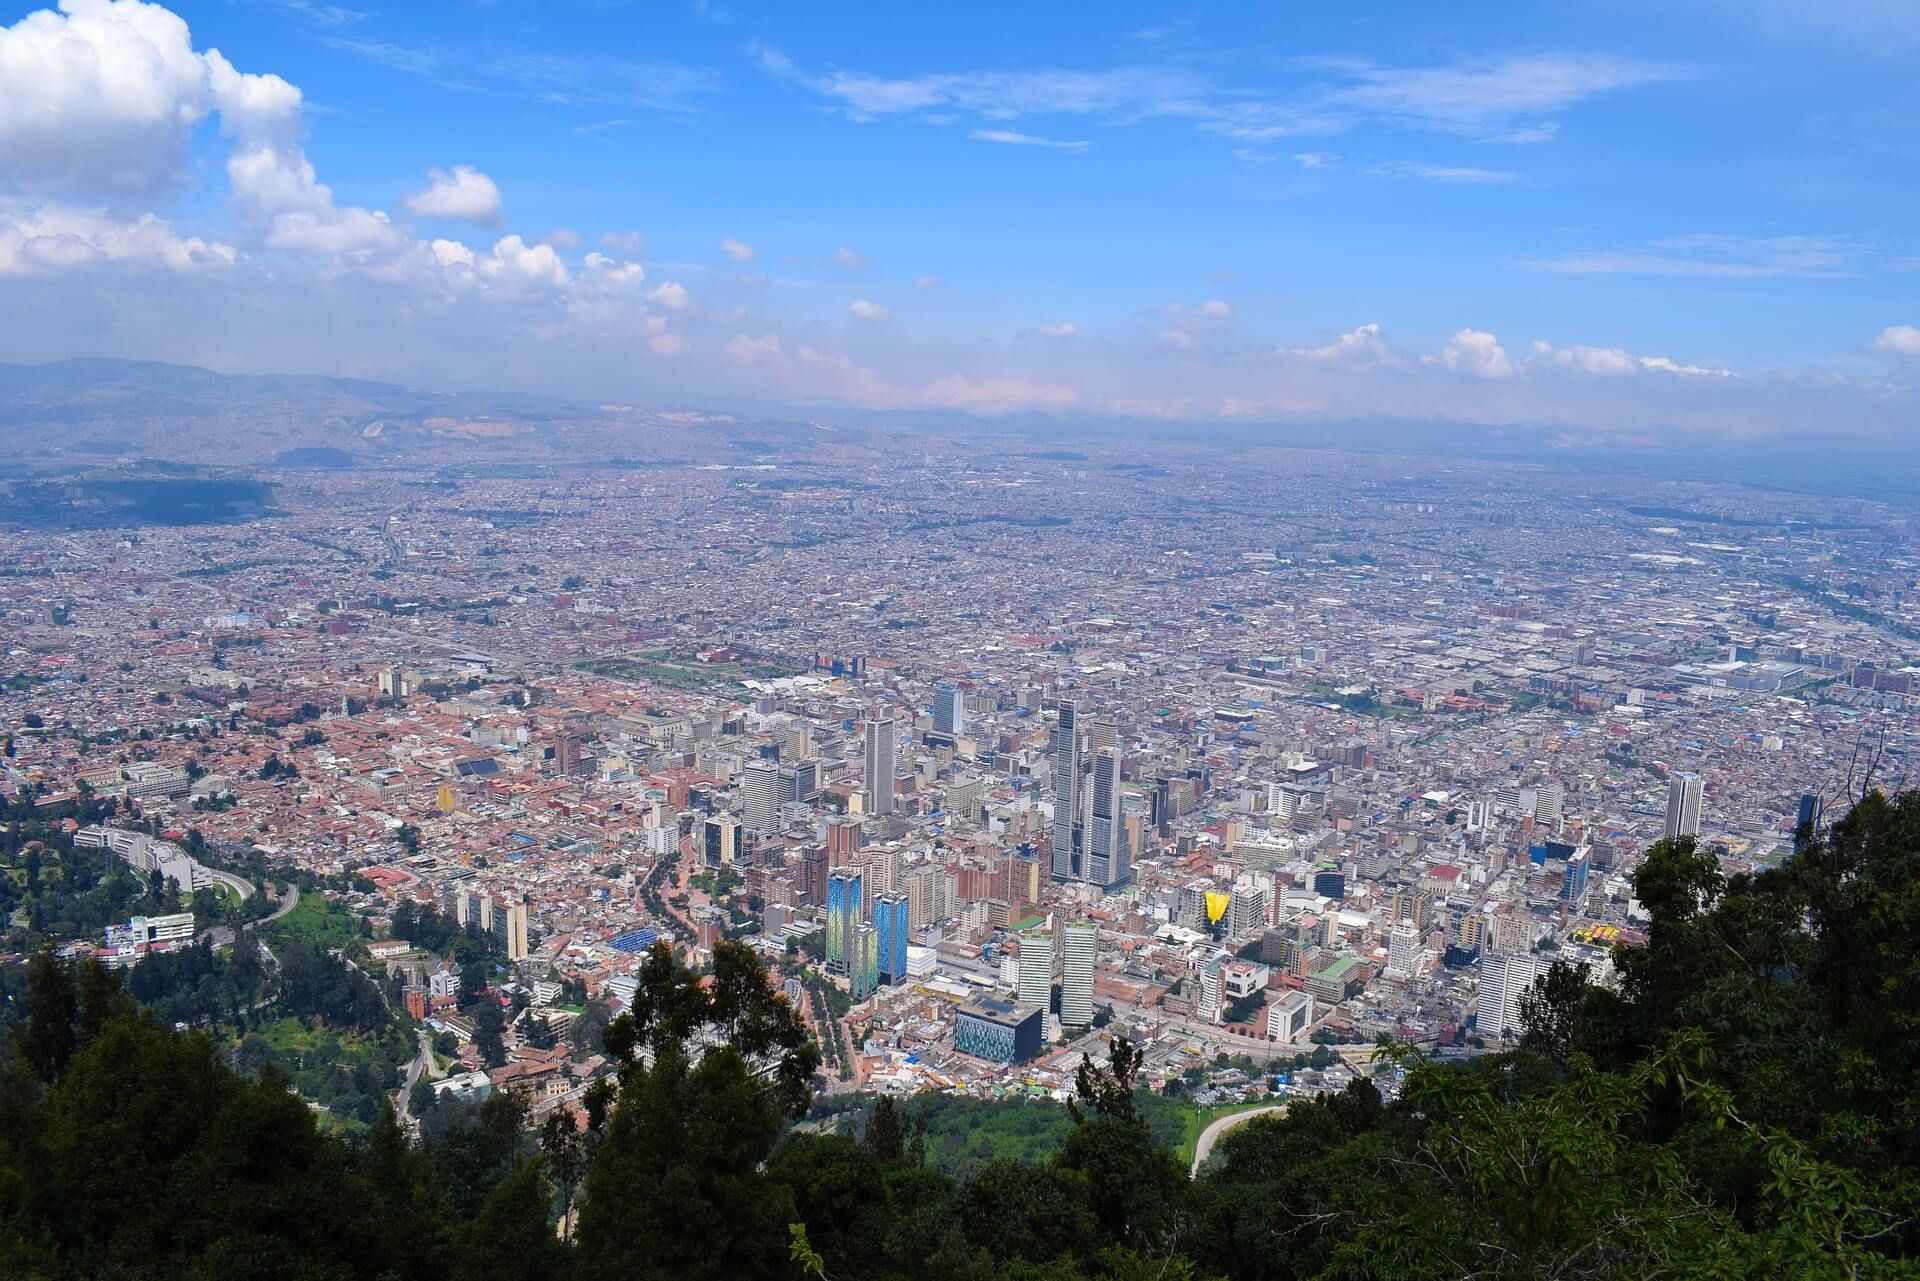 Colombia DIAN UBL 2.1 E-invoicing Mandate Reminds SAP Shops Why Compliance Matters